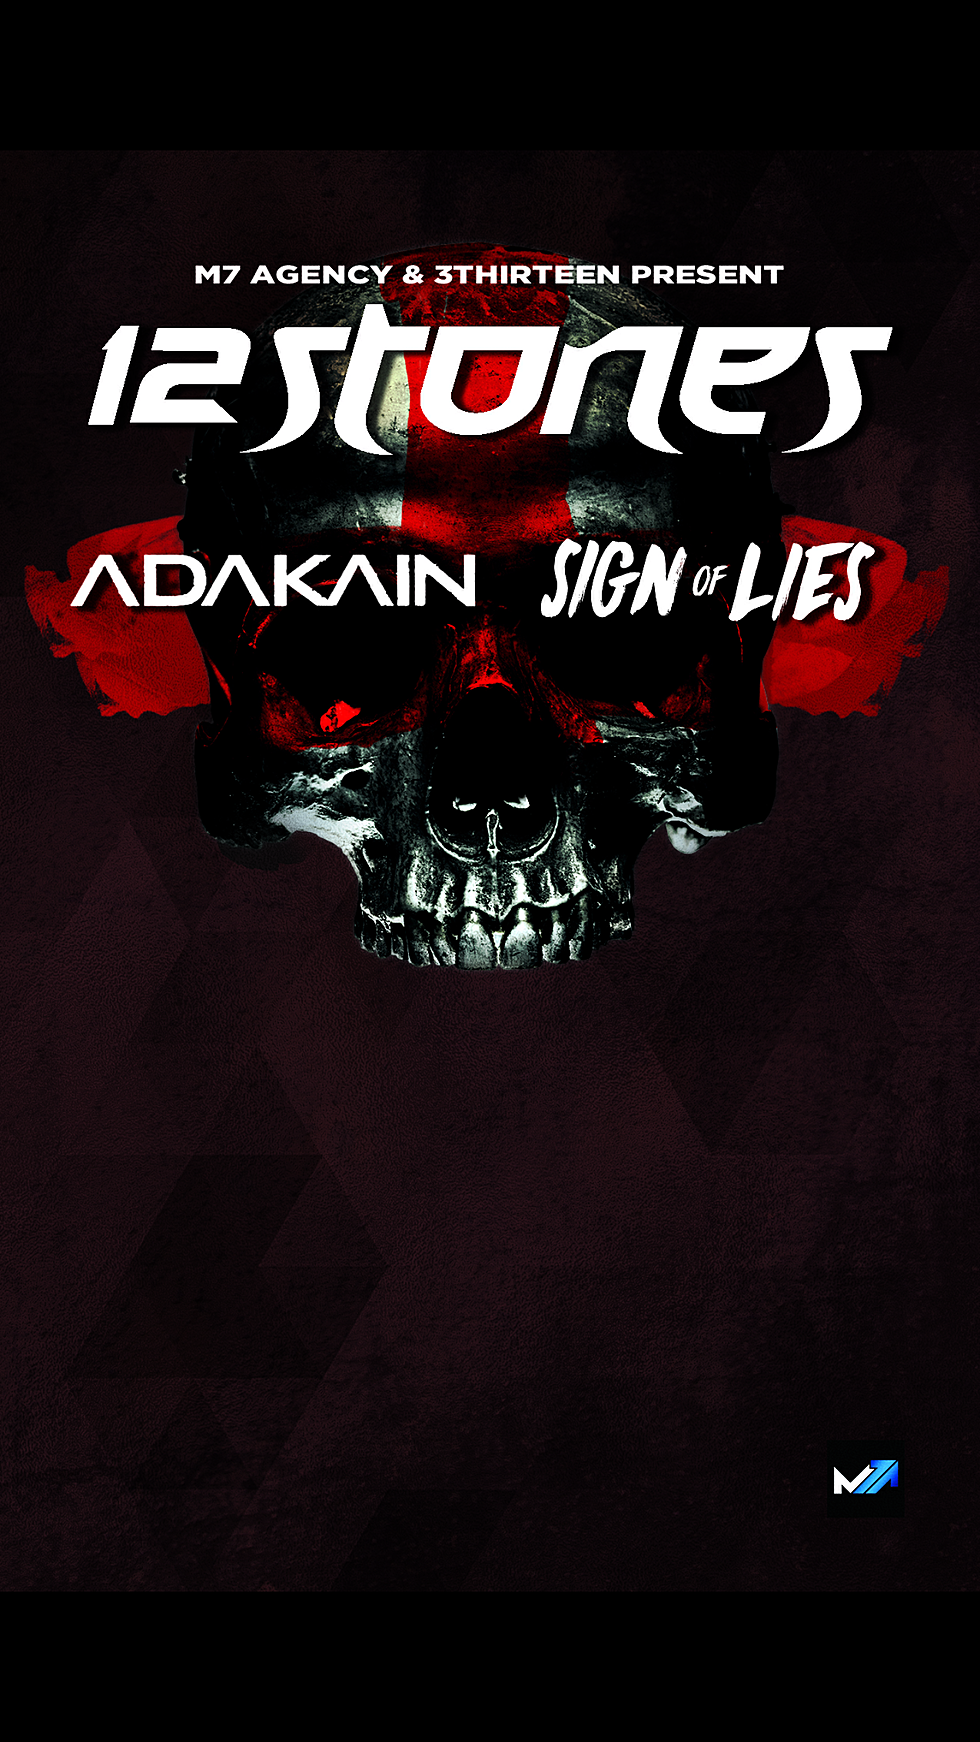 12 Stones Back In The Hub City On June 27